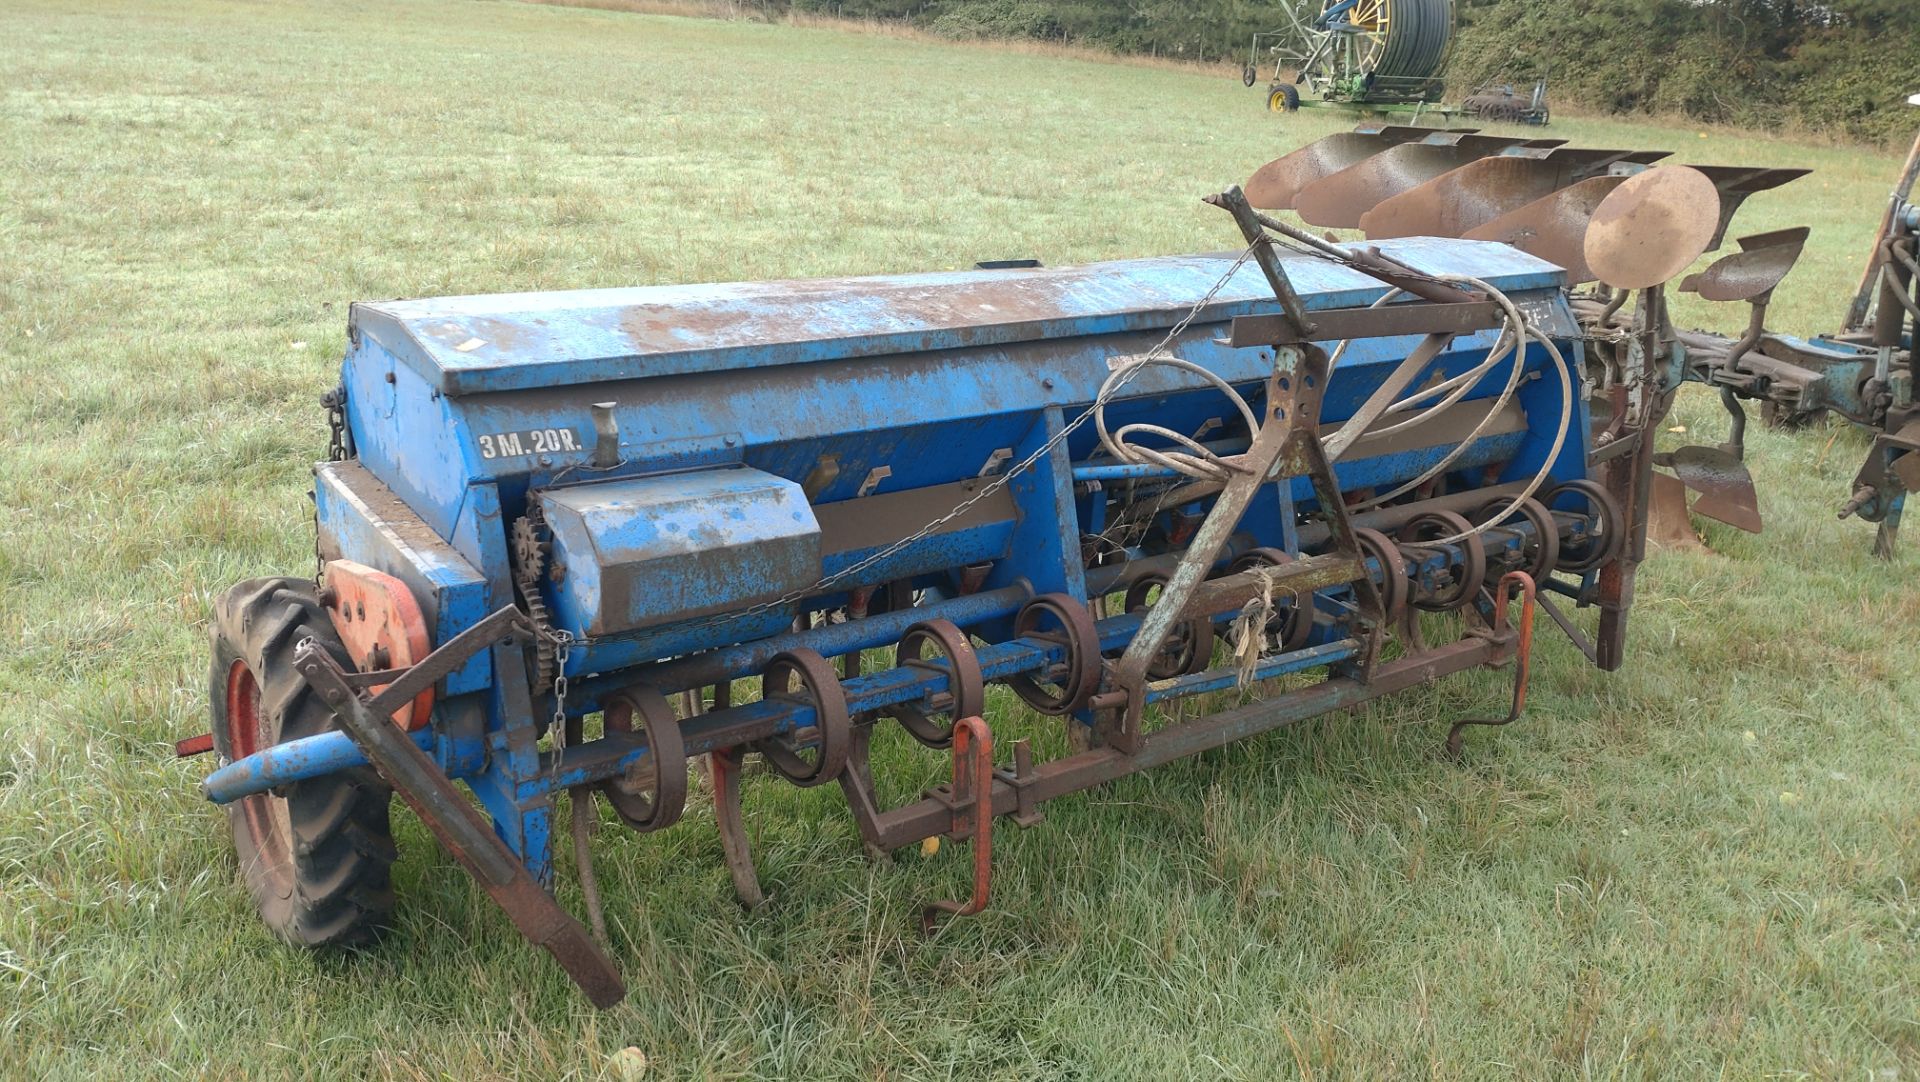 3m JF/Stegsted cultivator seed drill